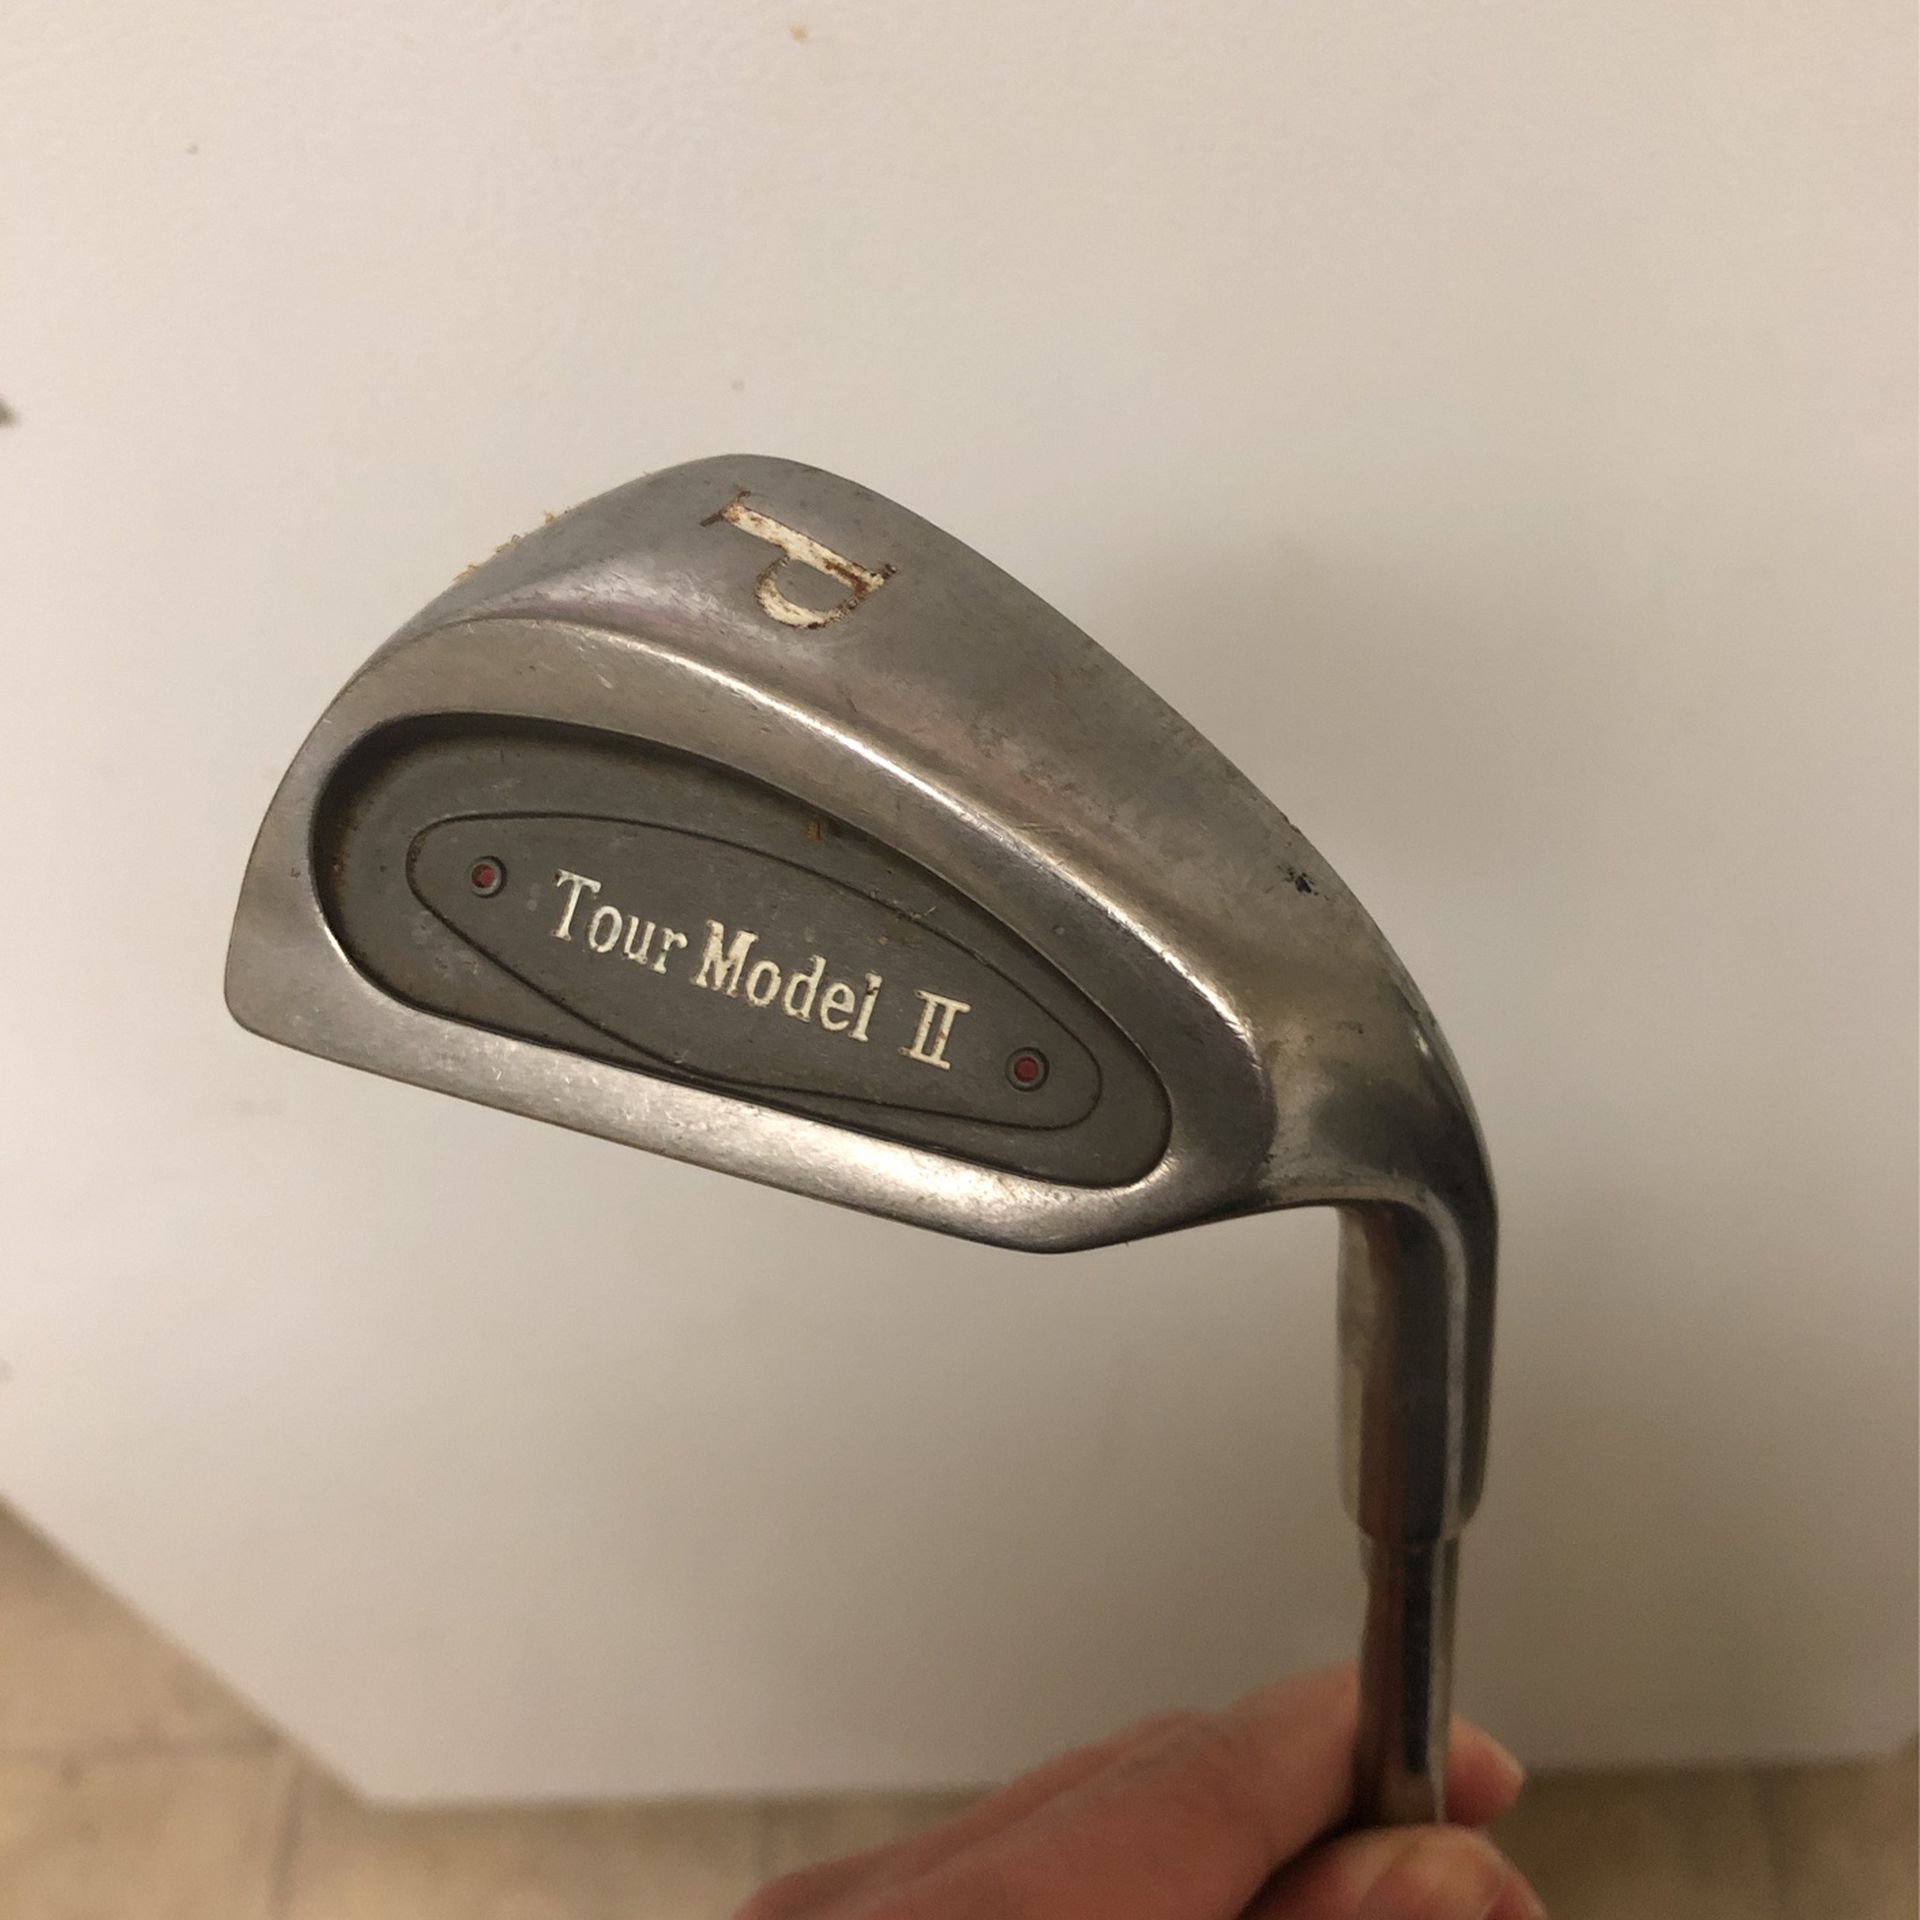 our Model II Pitching Wedge - Steel Shaft